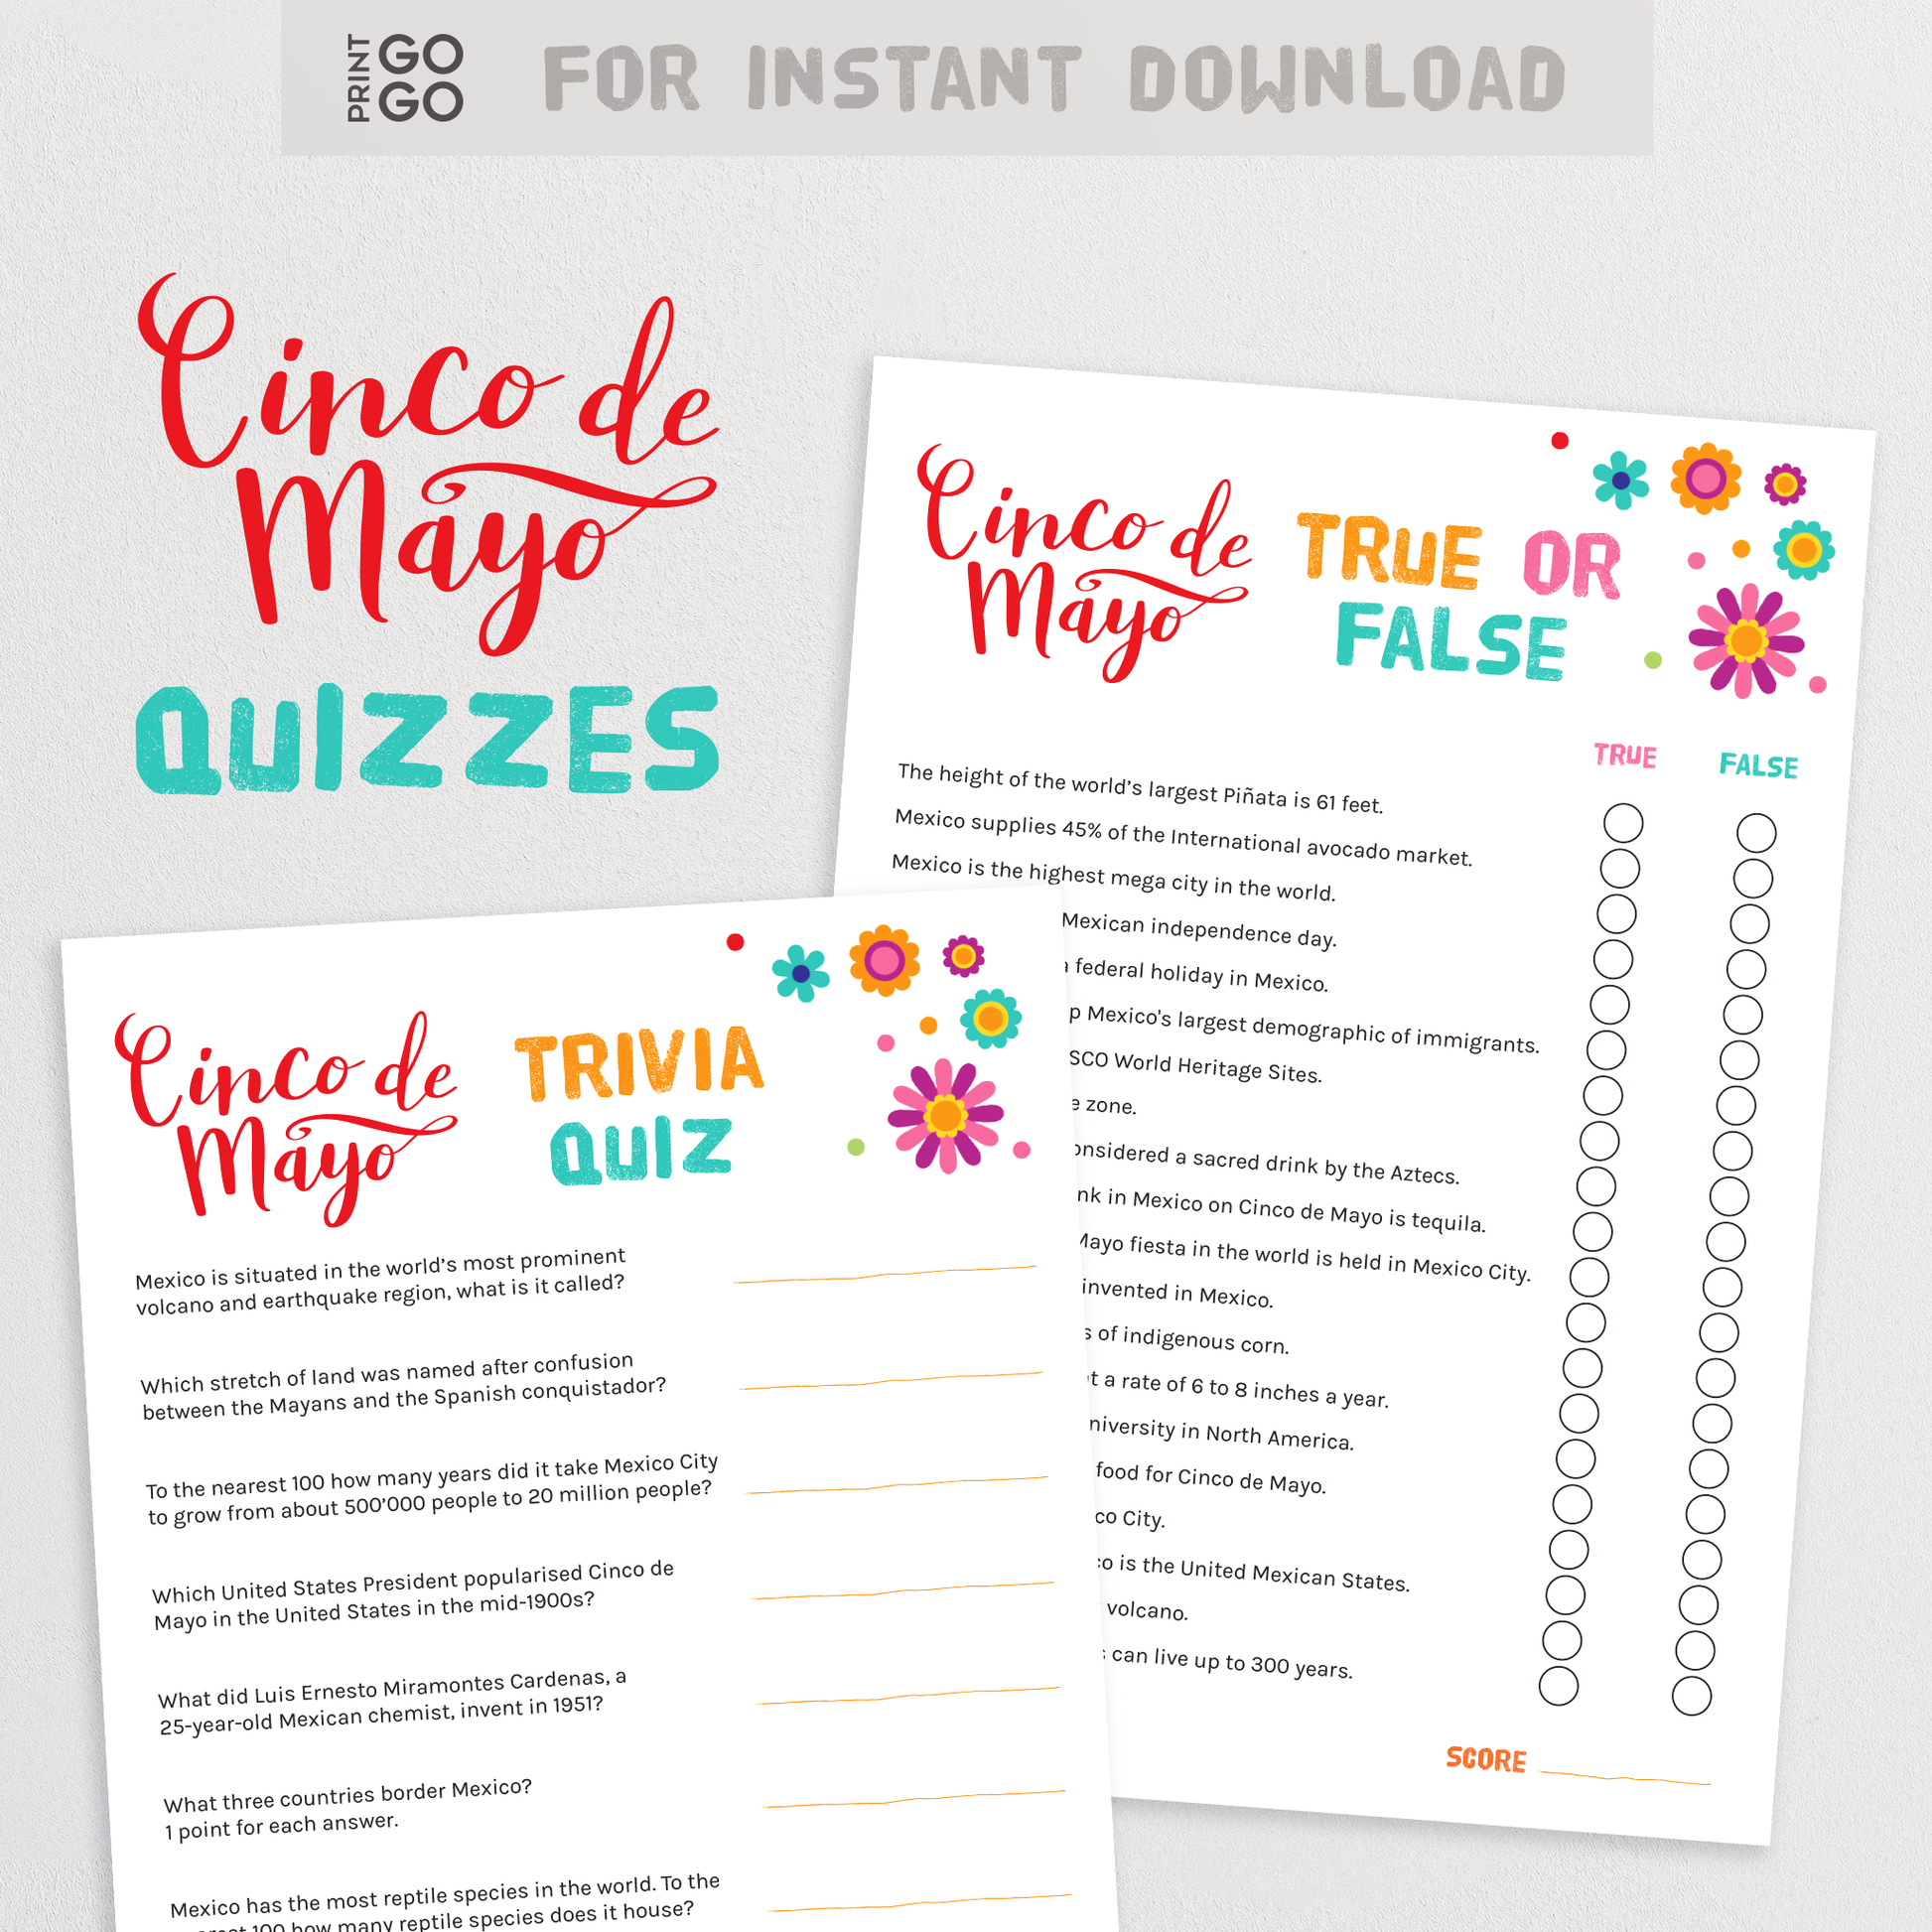 Cinco de Mayo Printable Trivia Quizzes - Put Your Family and Friends to the Test!